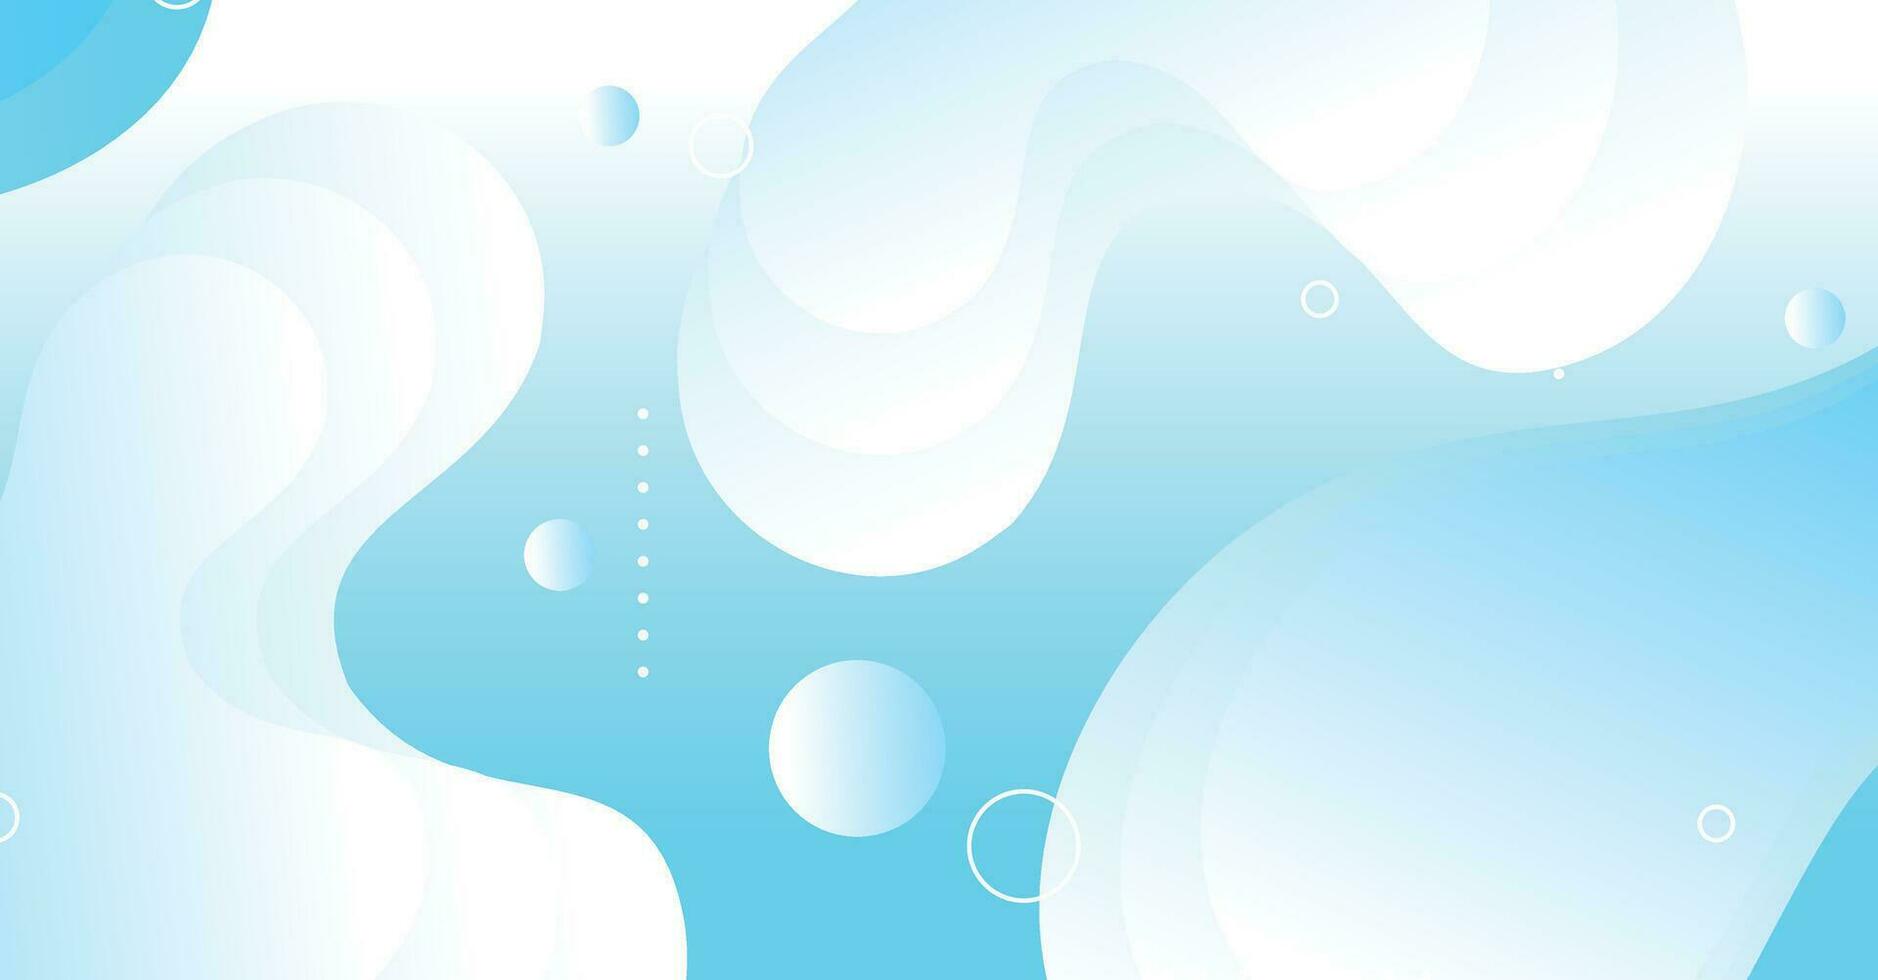 Abstract liquid wave background with blue and white gradient color background vector